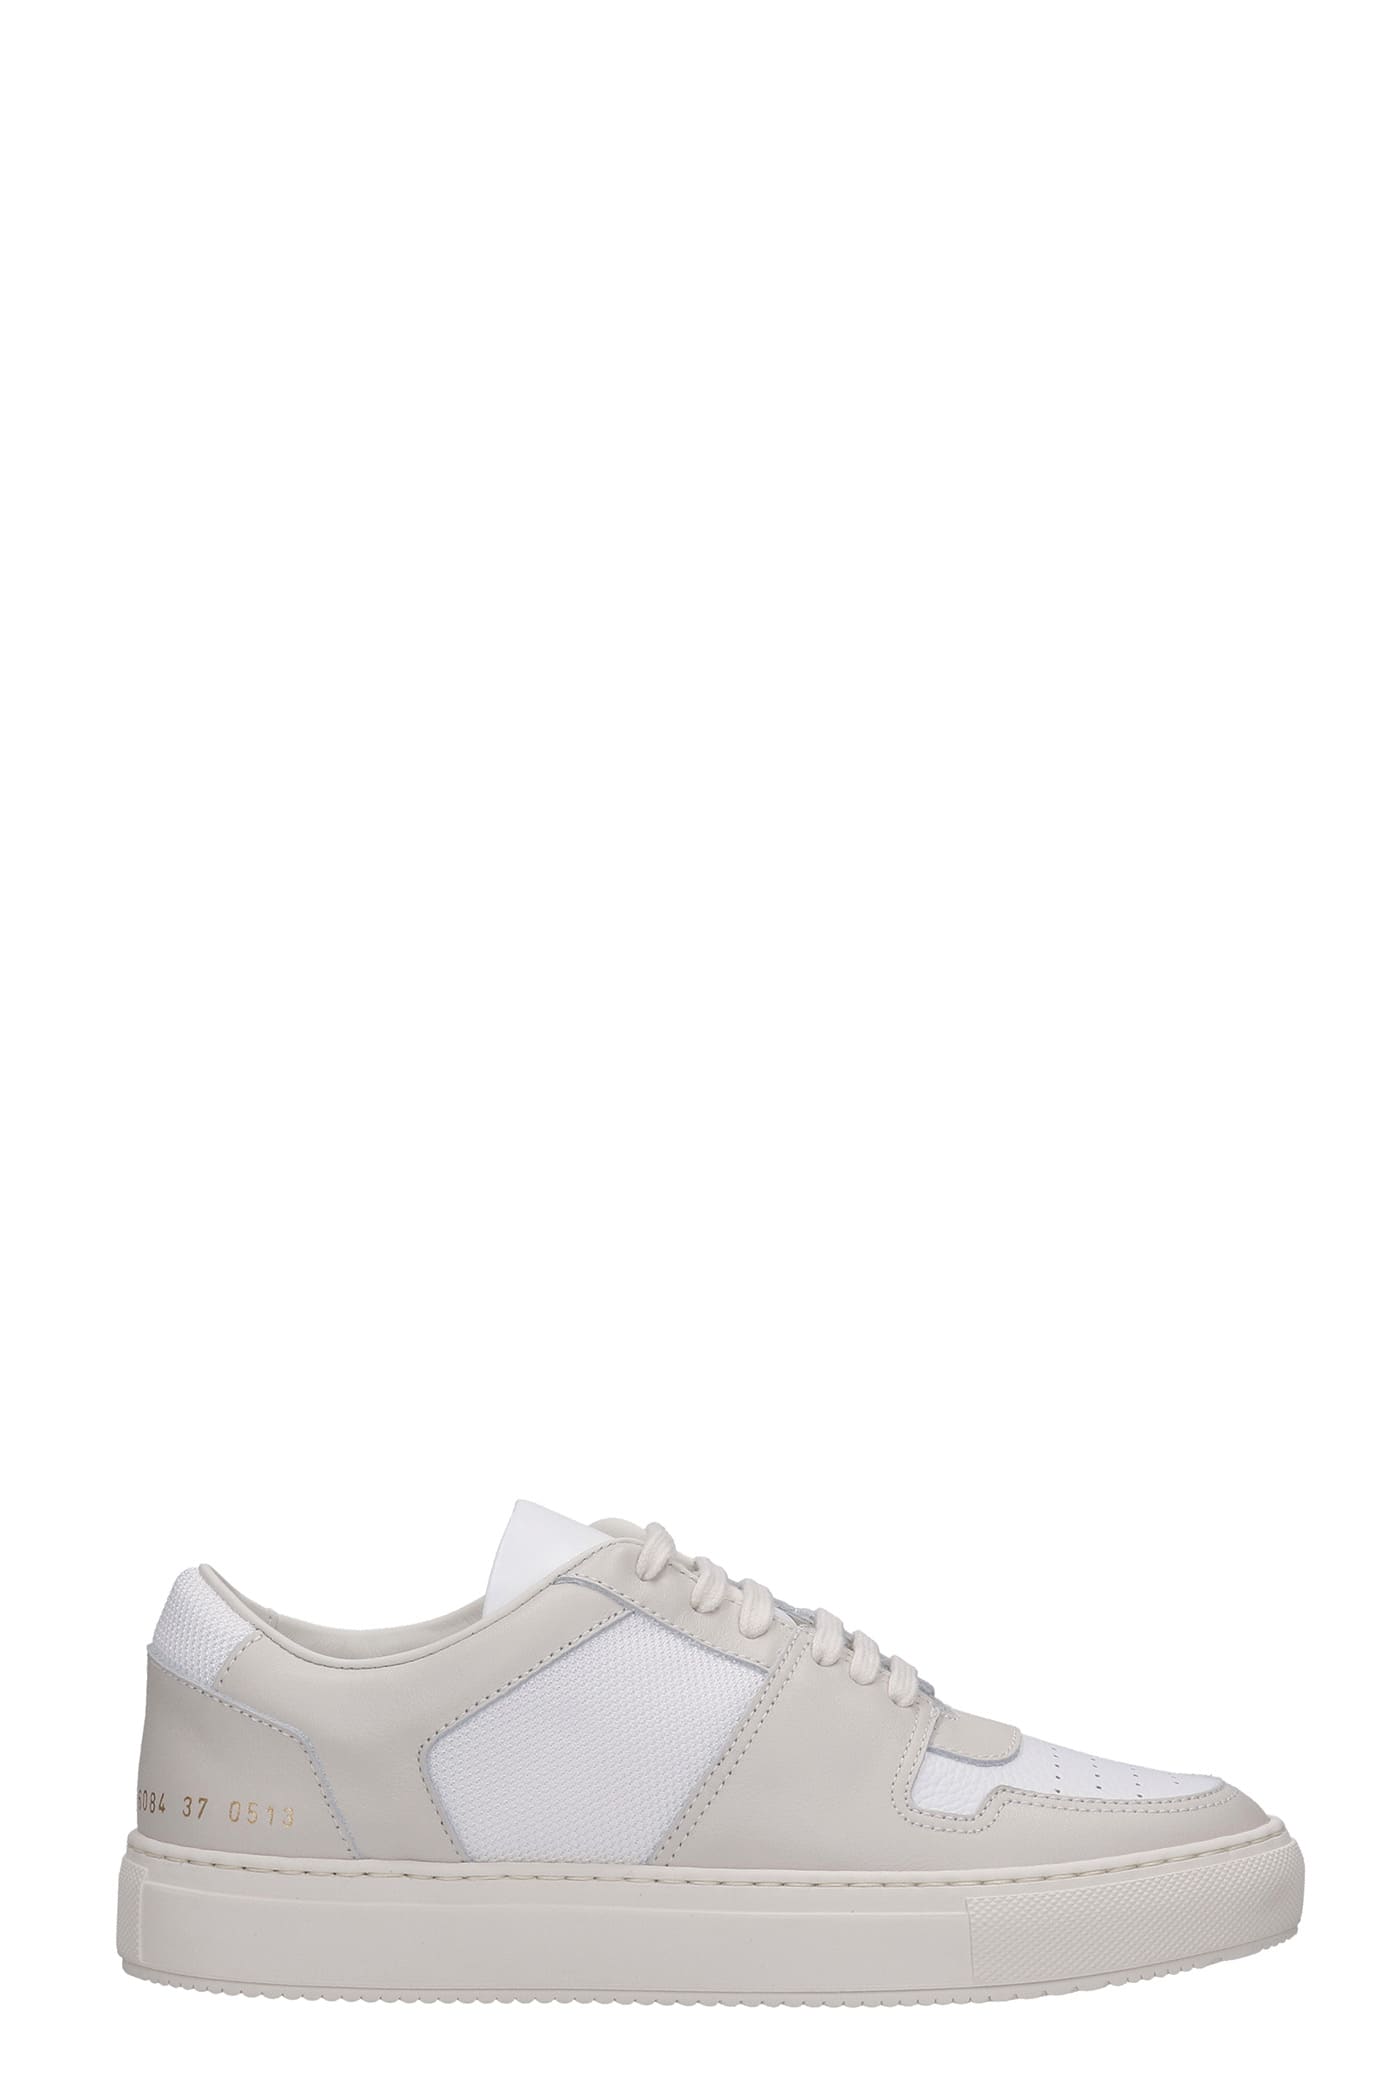 Common Projects Track 80 Sneakers In White Leather And Fabric